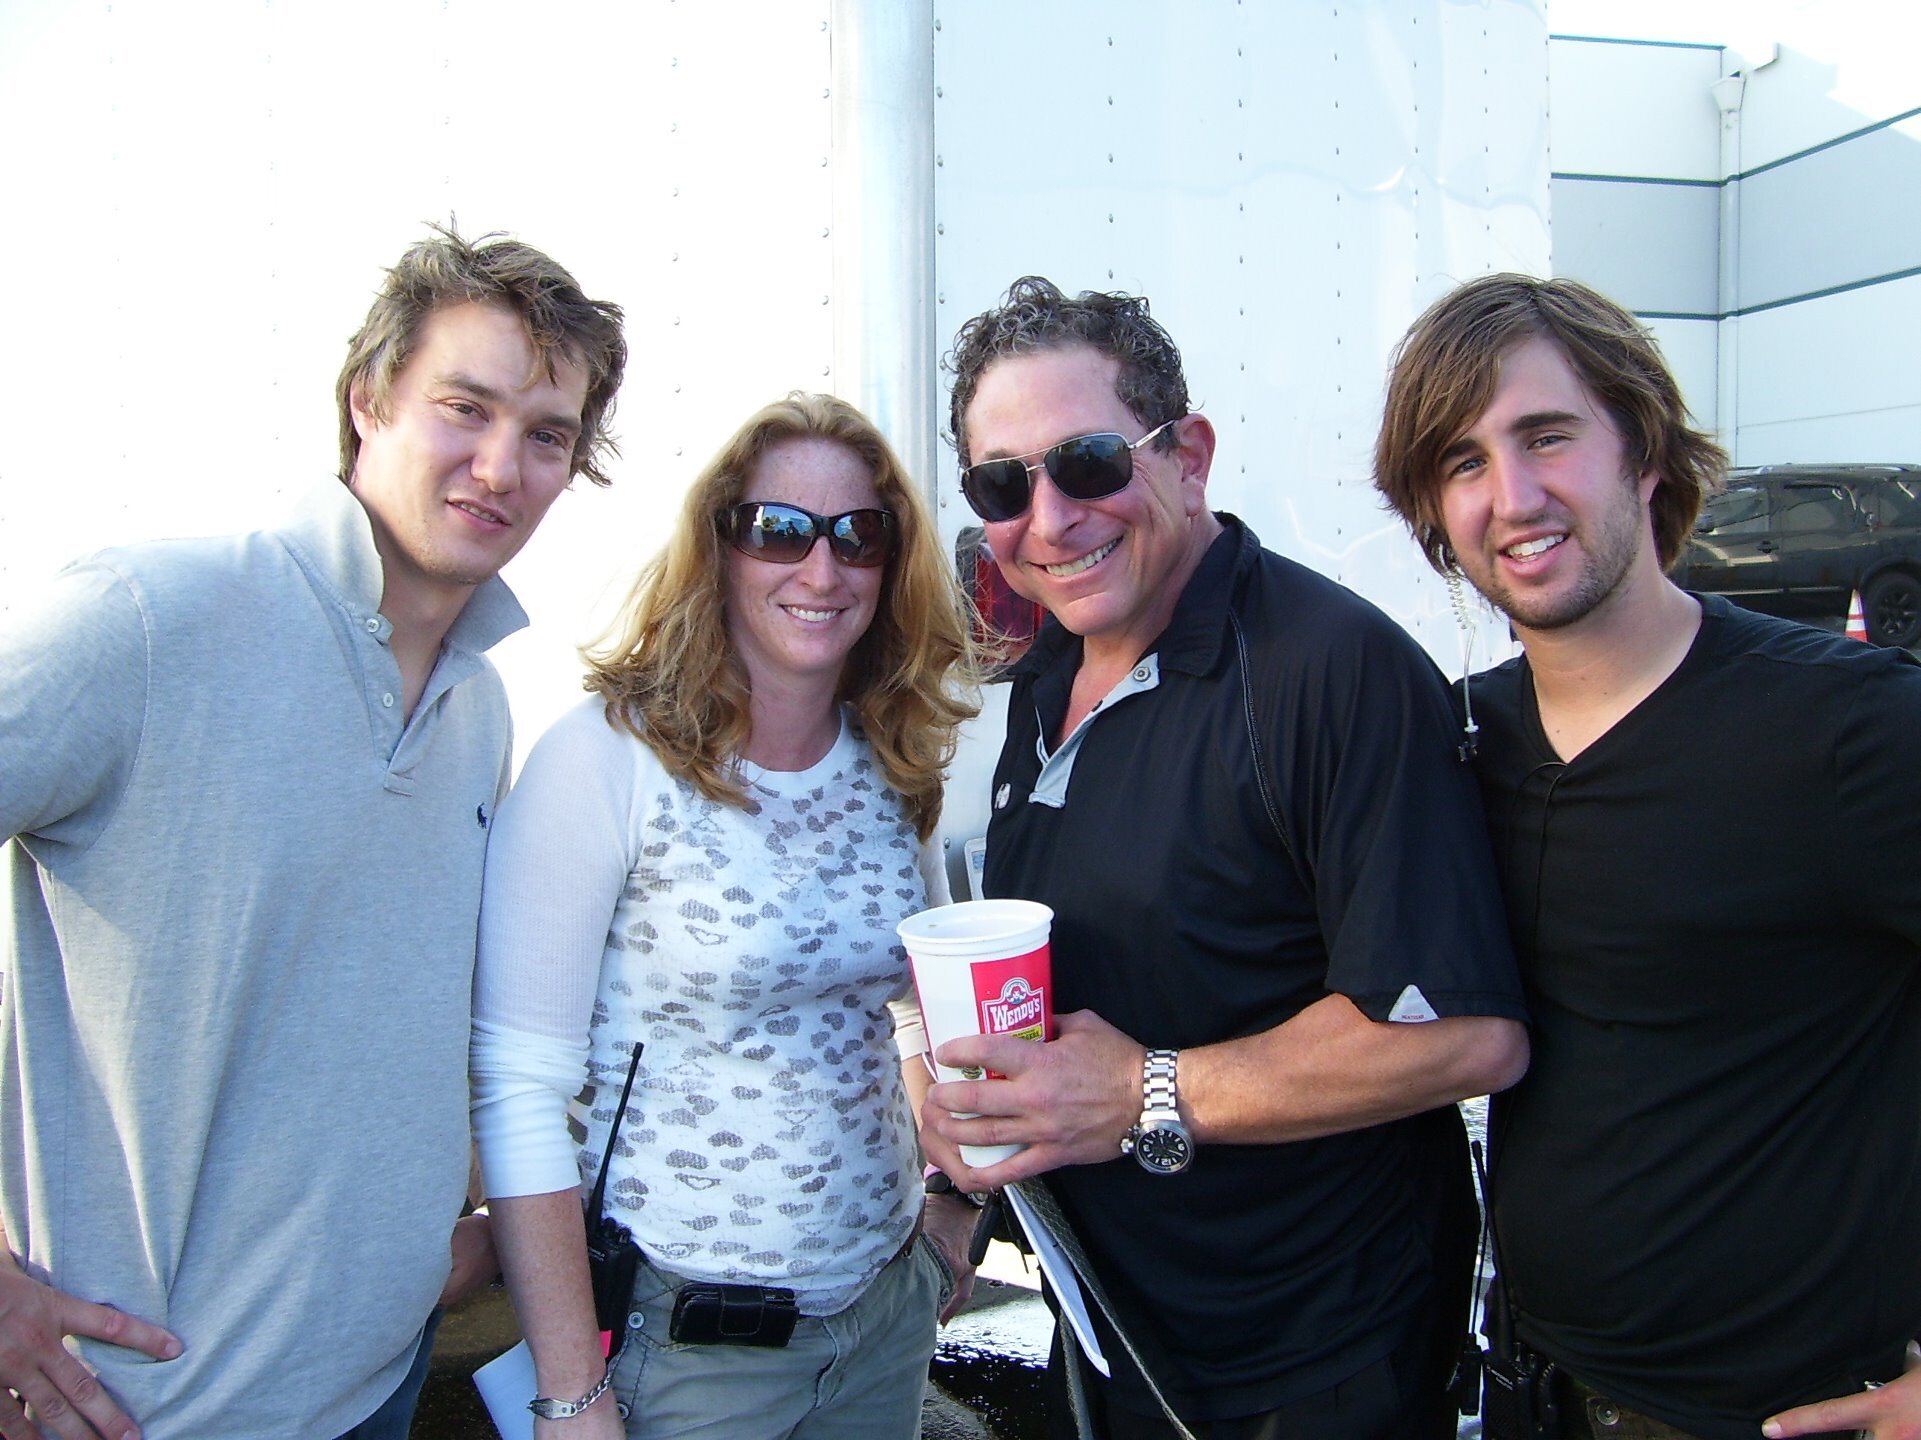 Producer Nick Allan, Production Coordinator Kami Norton, Actor Don Stark and Second Assistant Director Travis Huff